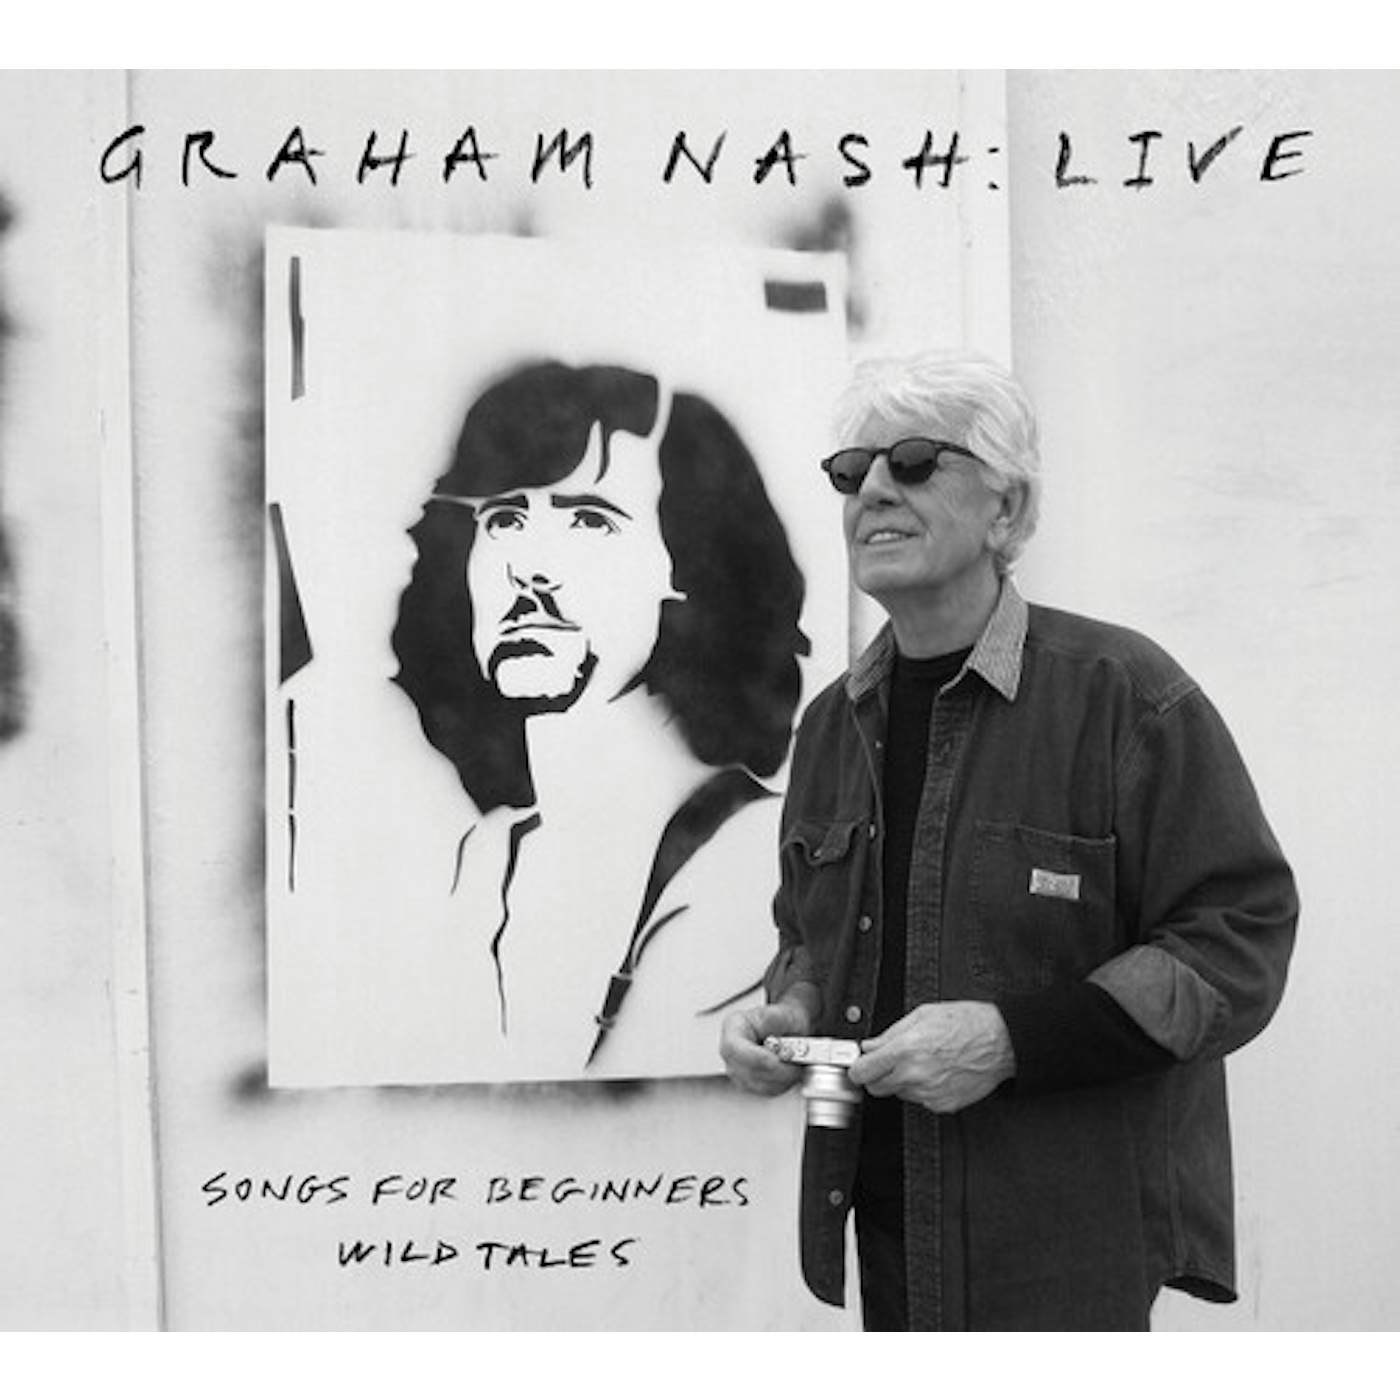 Graham Nash LIVE SONGS FOR BEGINNERS WILD TALES CD